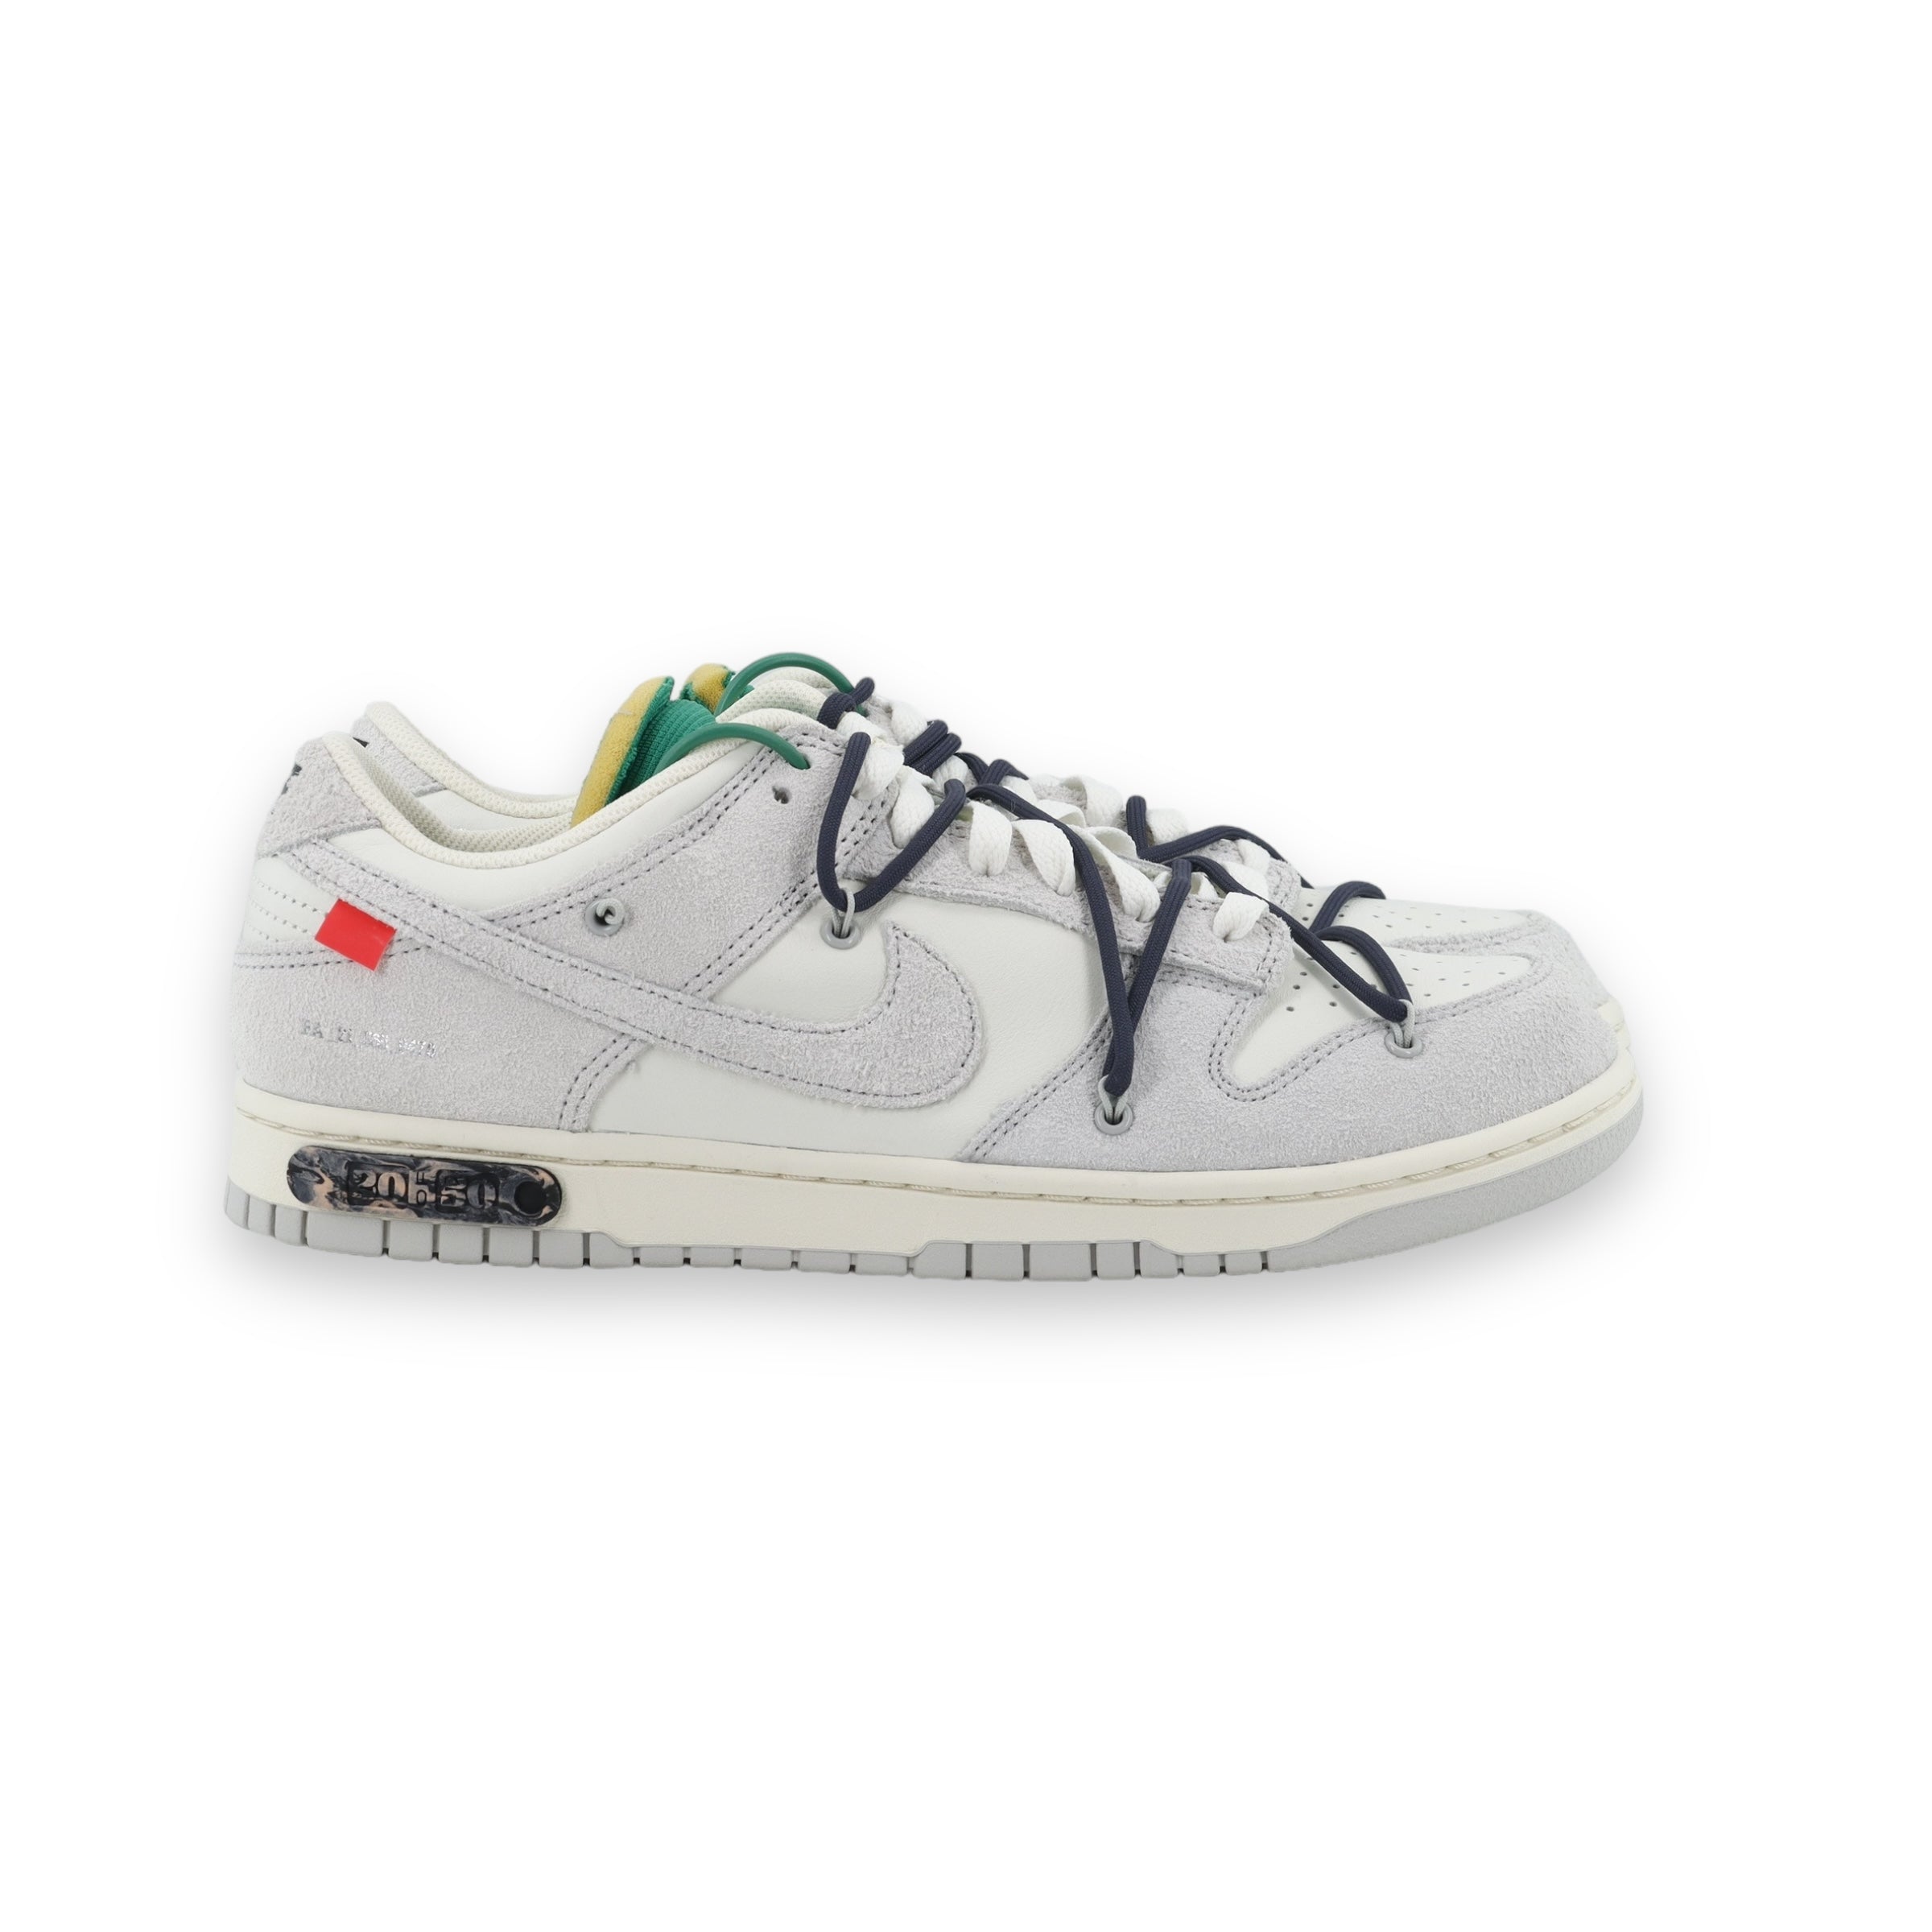 Off White Dunk Lot 20